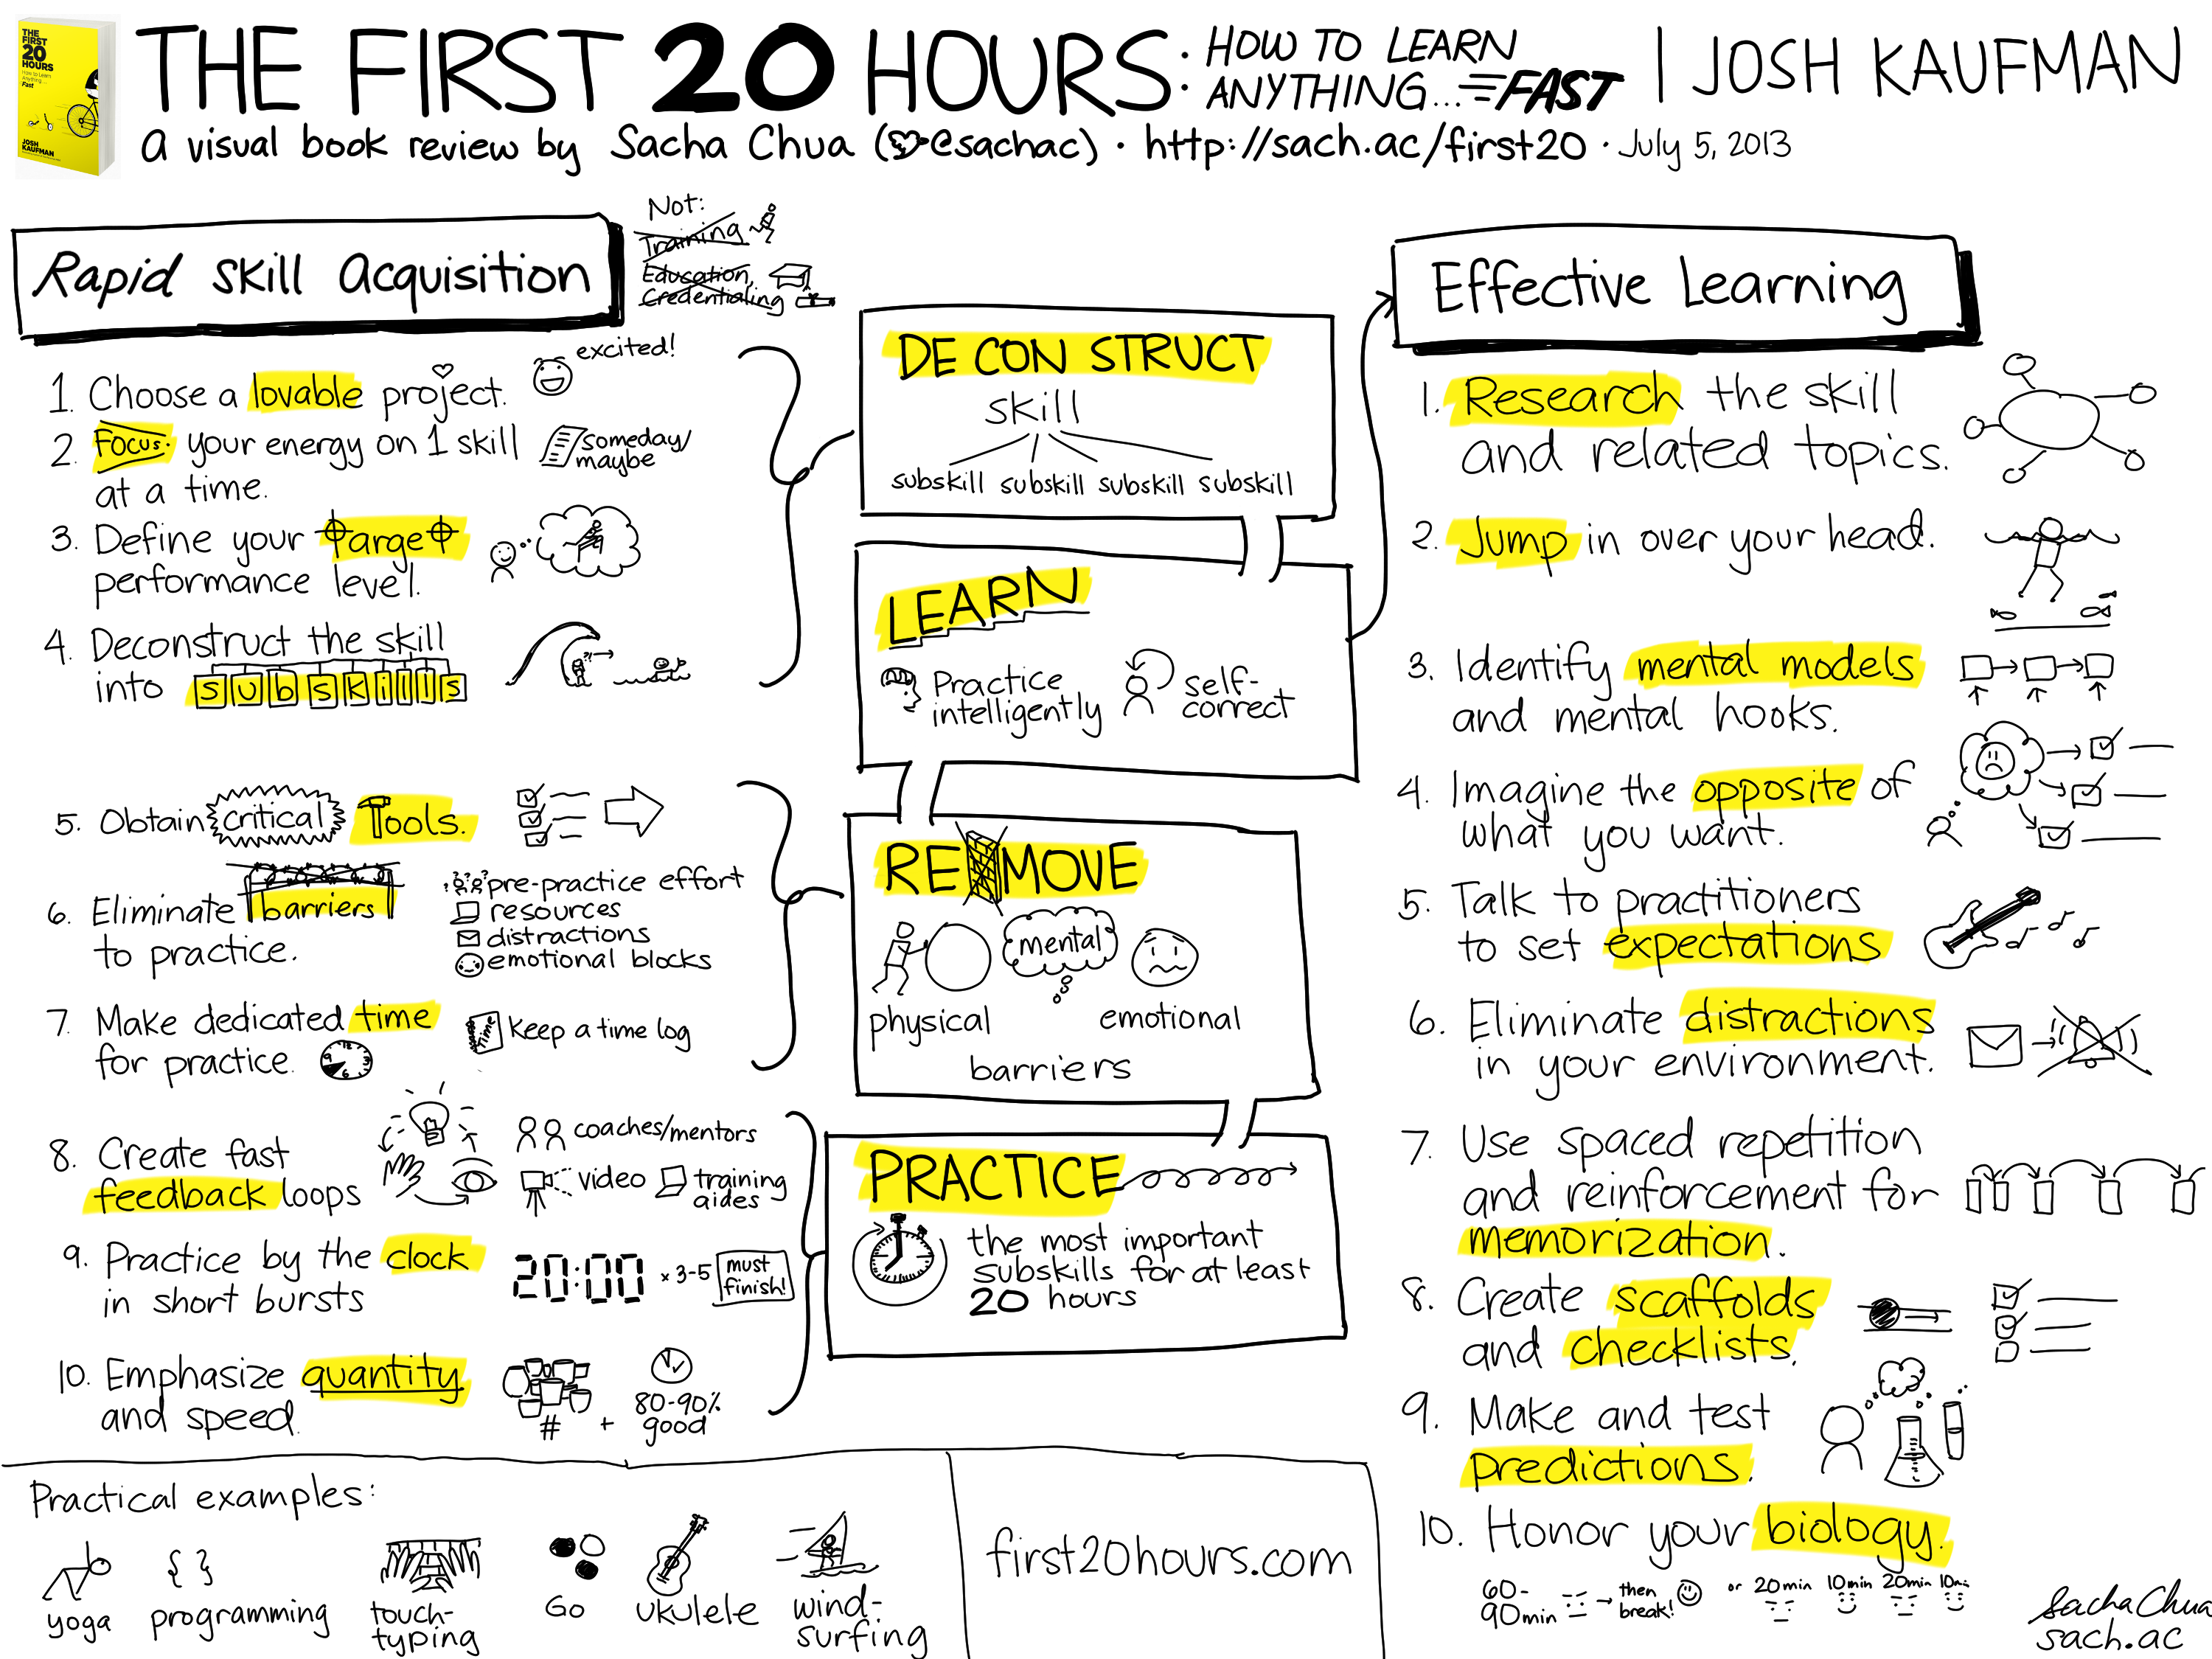 2013-07-05 Book - The First 20 Hours - How to Learn Anything